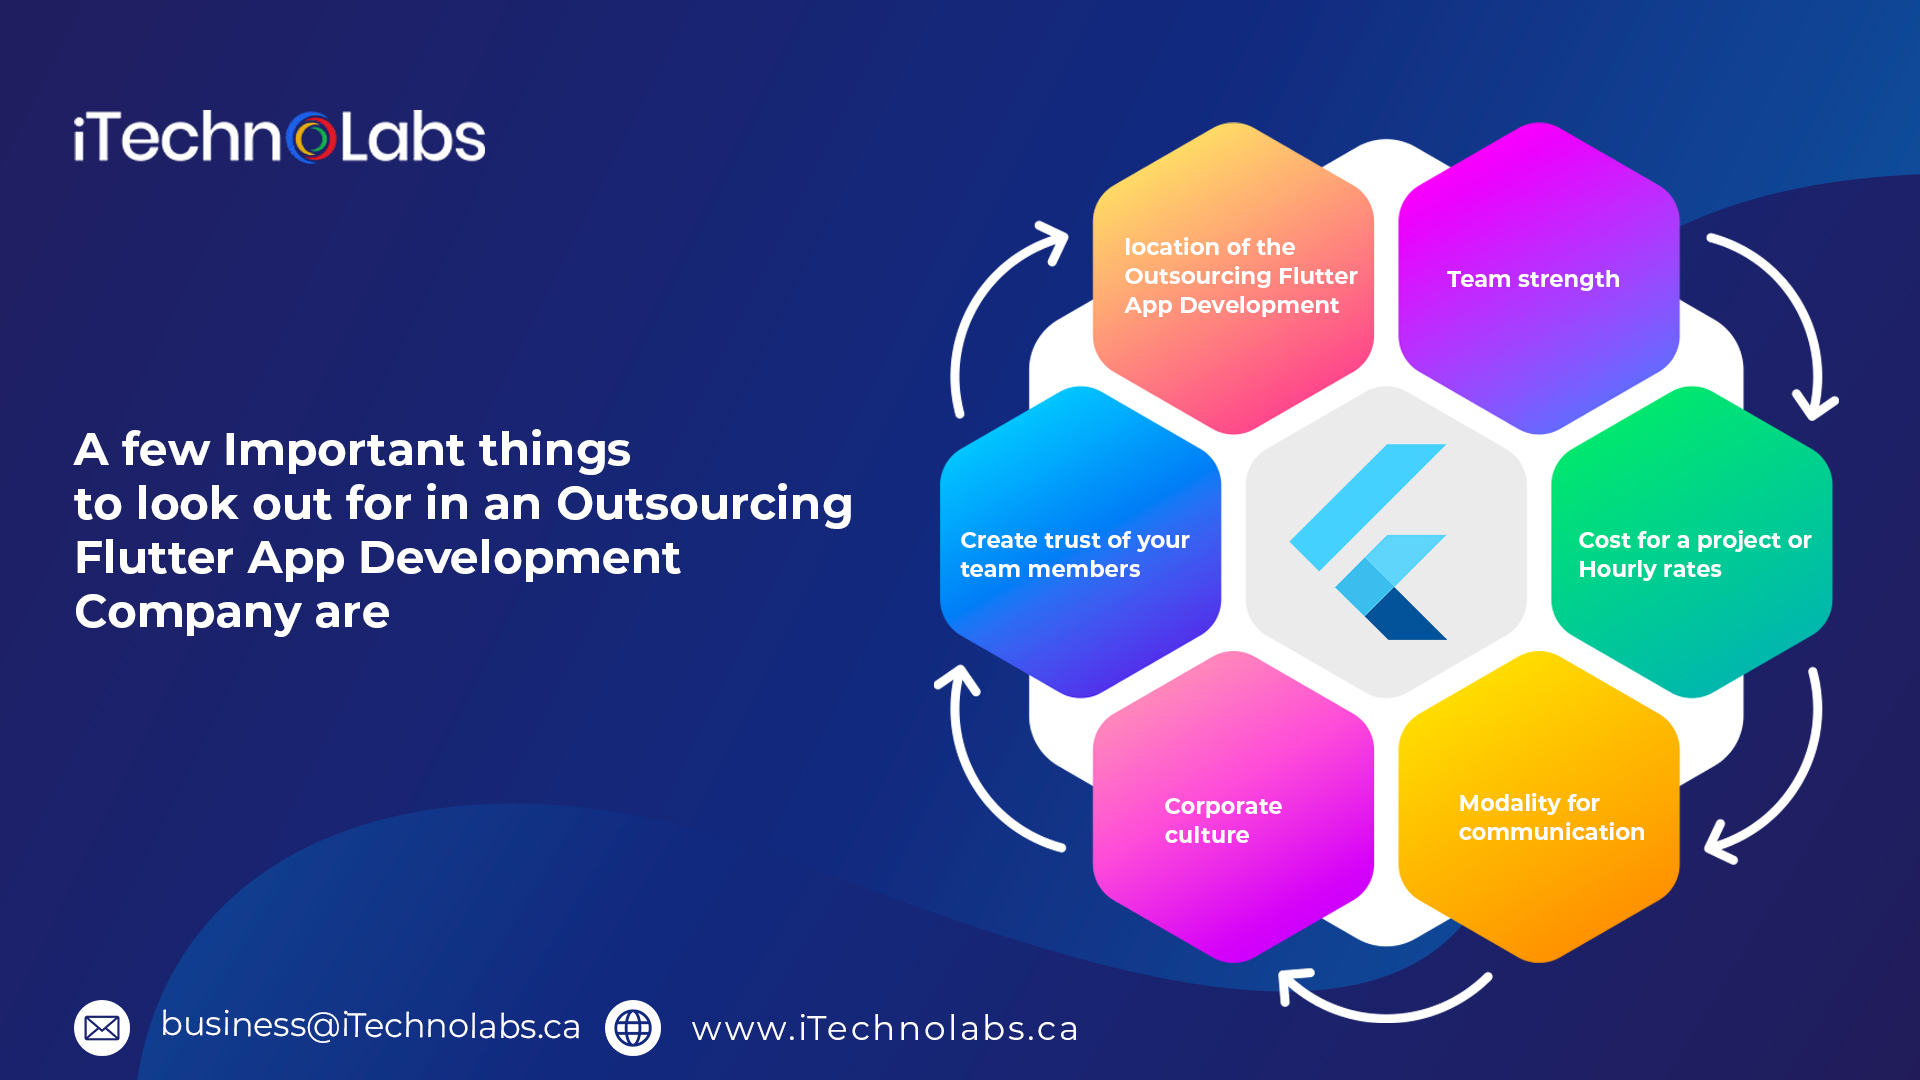 a few important things to look out for in an outsourcing flutter app development company are itechnolabs